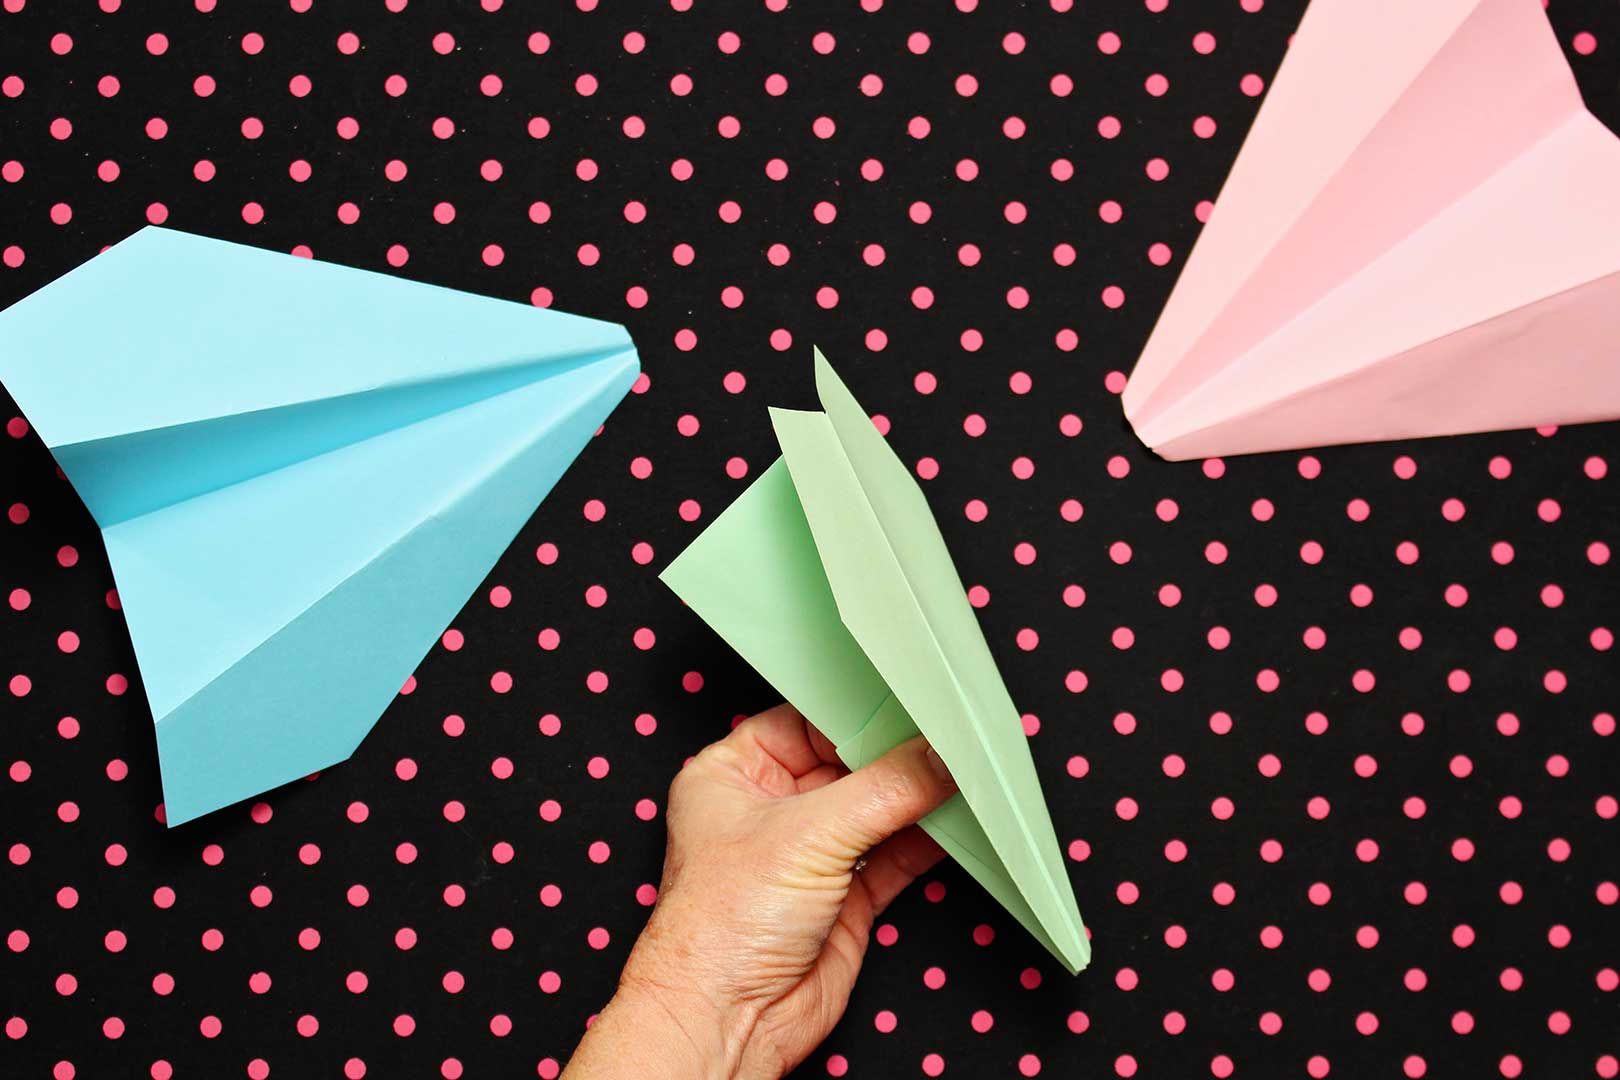 A hand showing individual folds instructing how to make a paper airplane out of green paper. Two finished planes sit next to it on a black and pink polka dotted background.